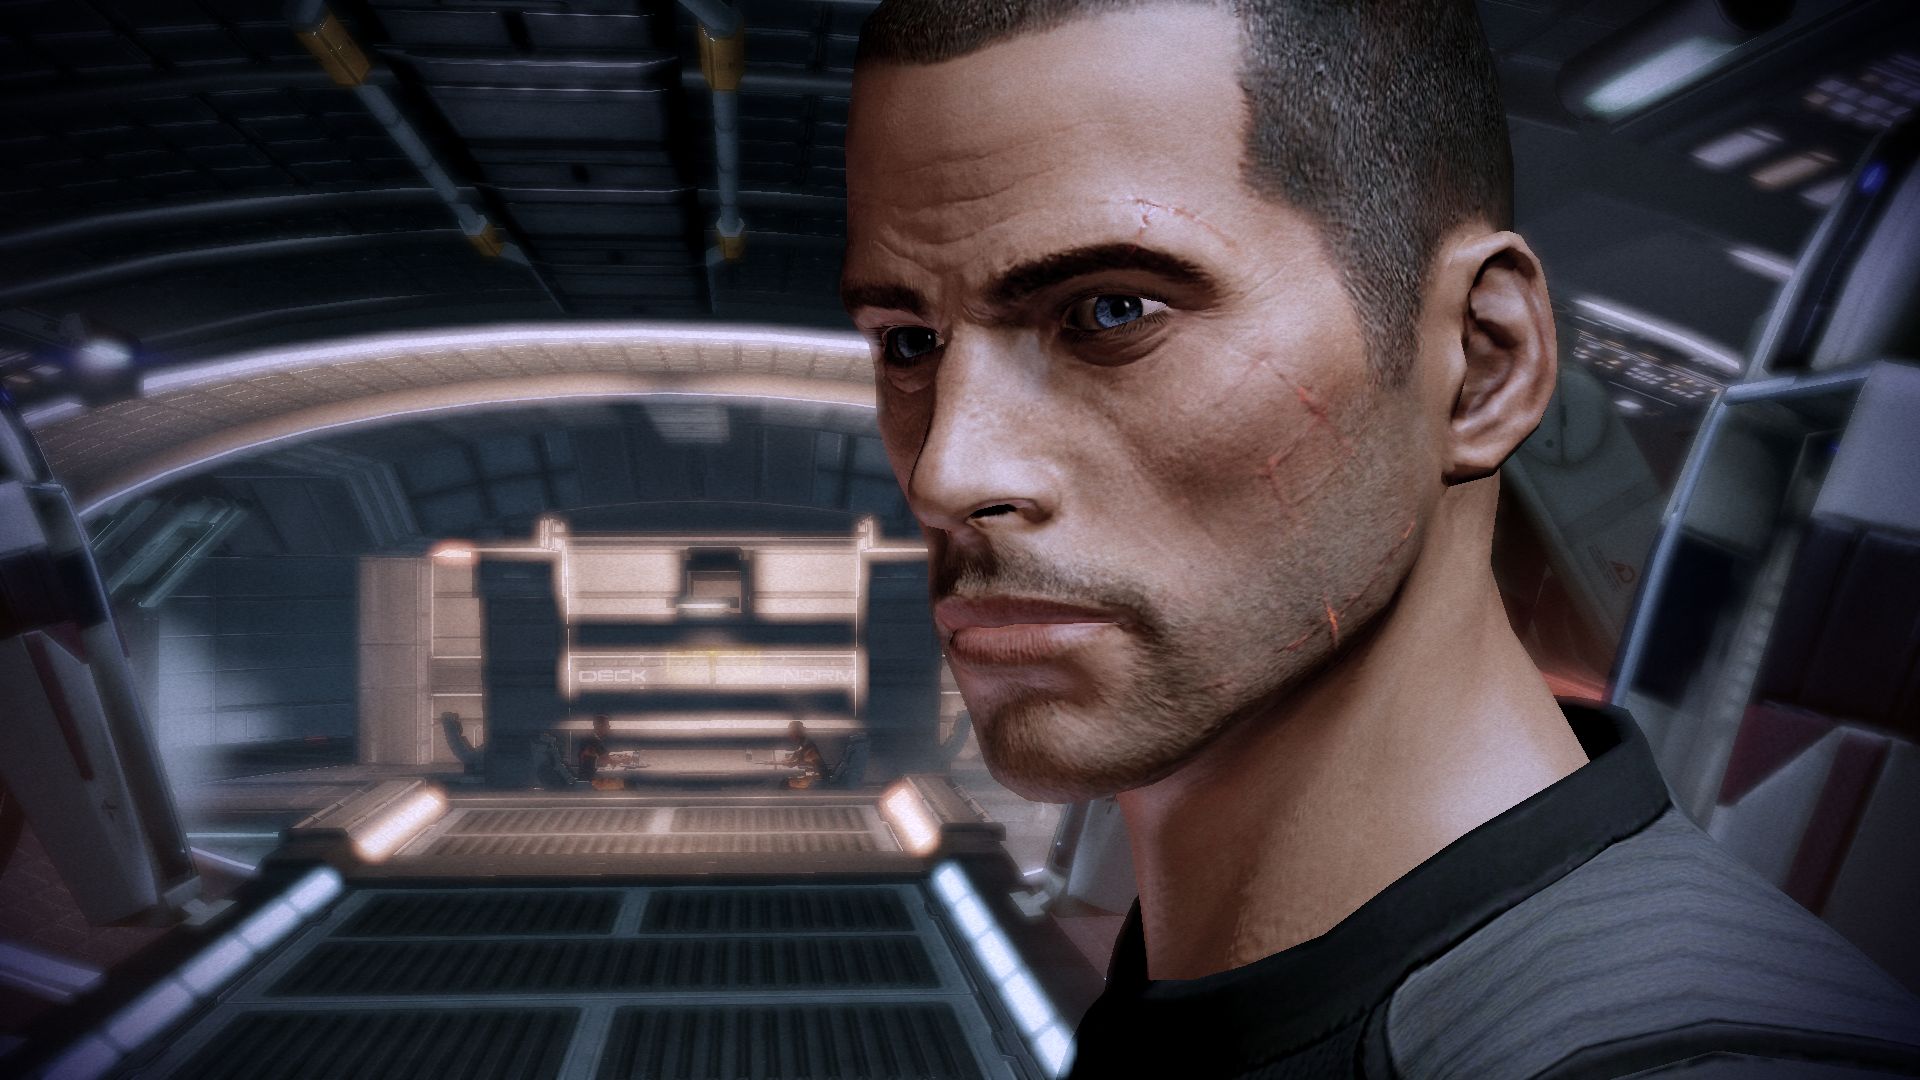 BroShep’s voice actor played so many weird alien side characters in Mass Effect he doesn’t mind if people prefer FemShep: ‘I’m afraid you’ll be forced to encounter me as Niftu Cal and Blasto and any vorcha you run into’